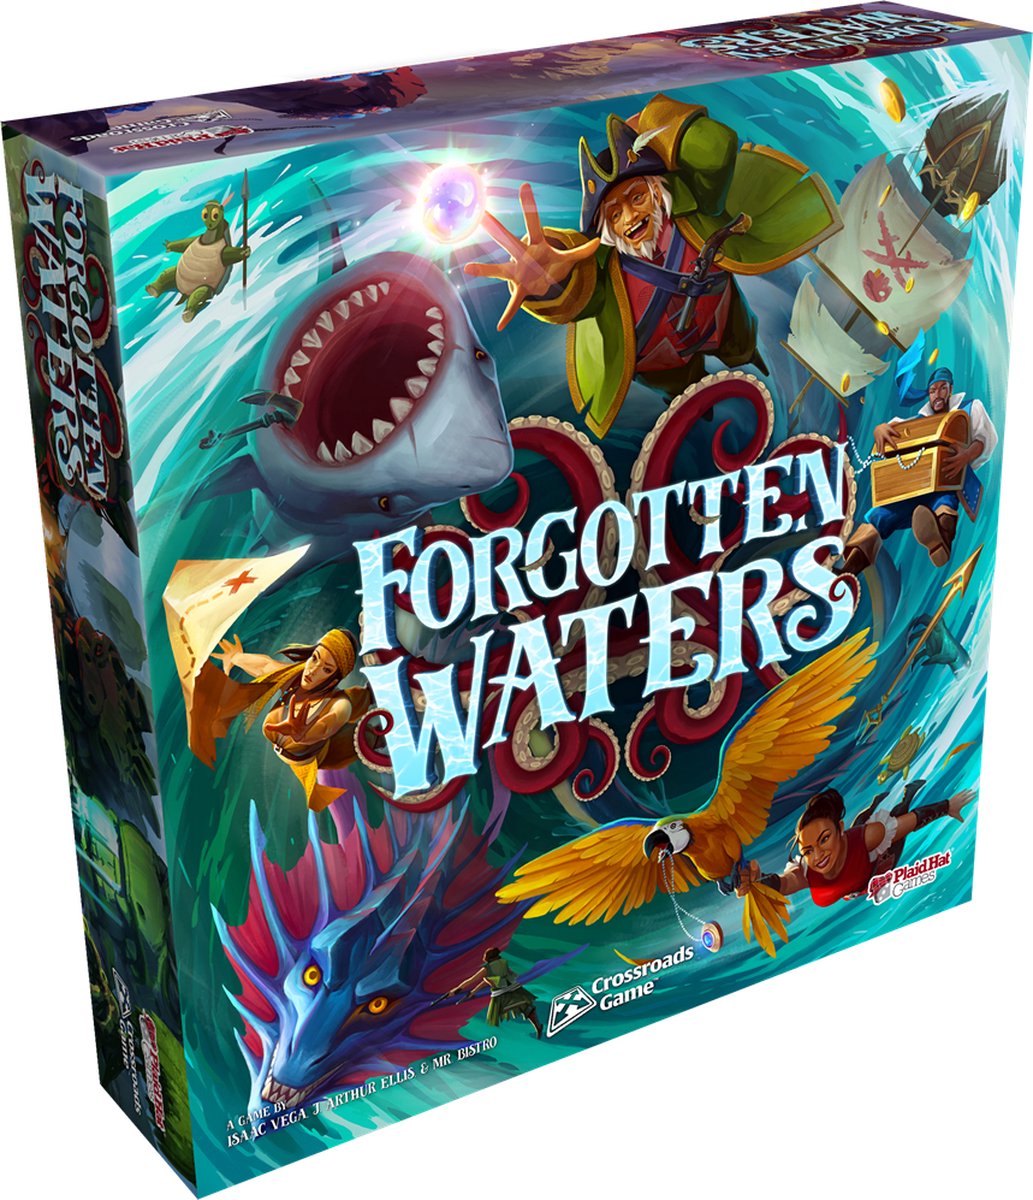 Forgotten Waters, A Crossroads Game - Plaid Hat Games